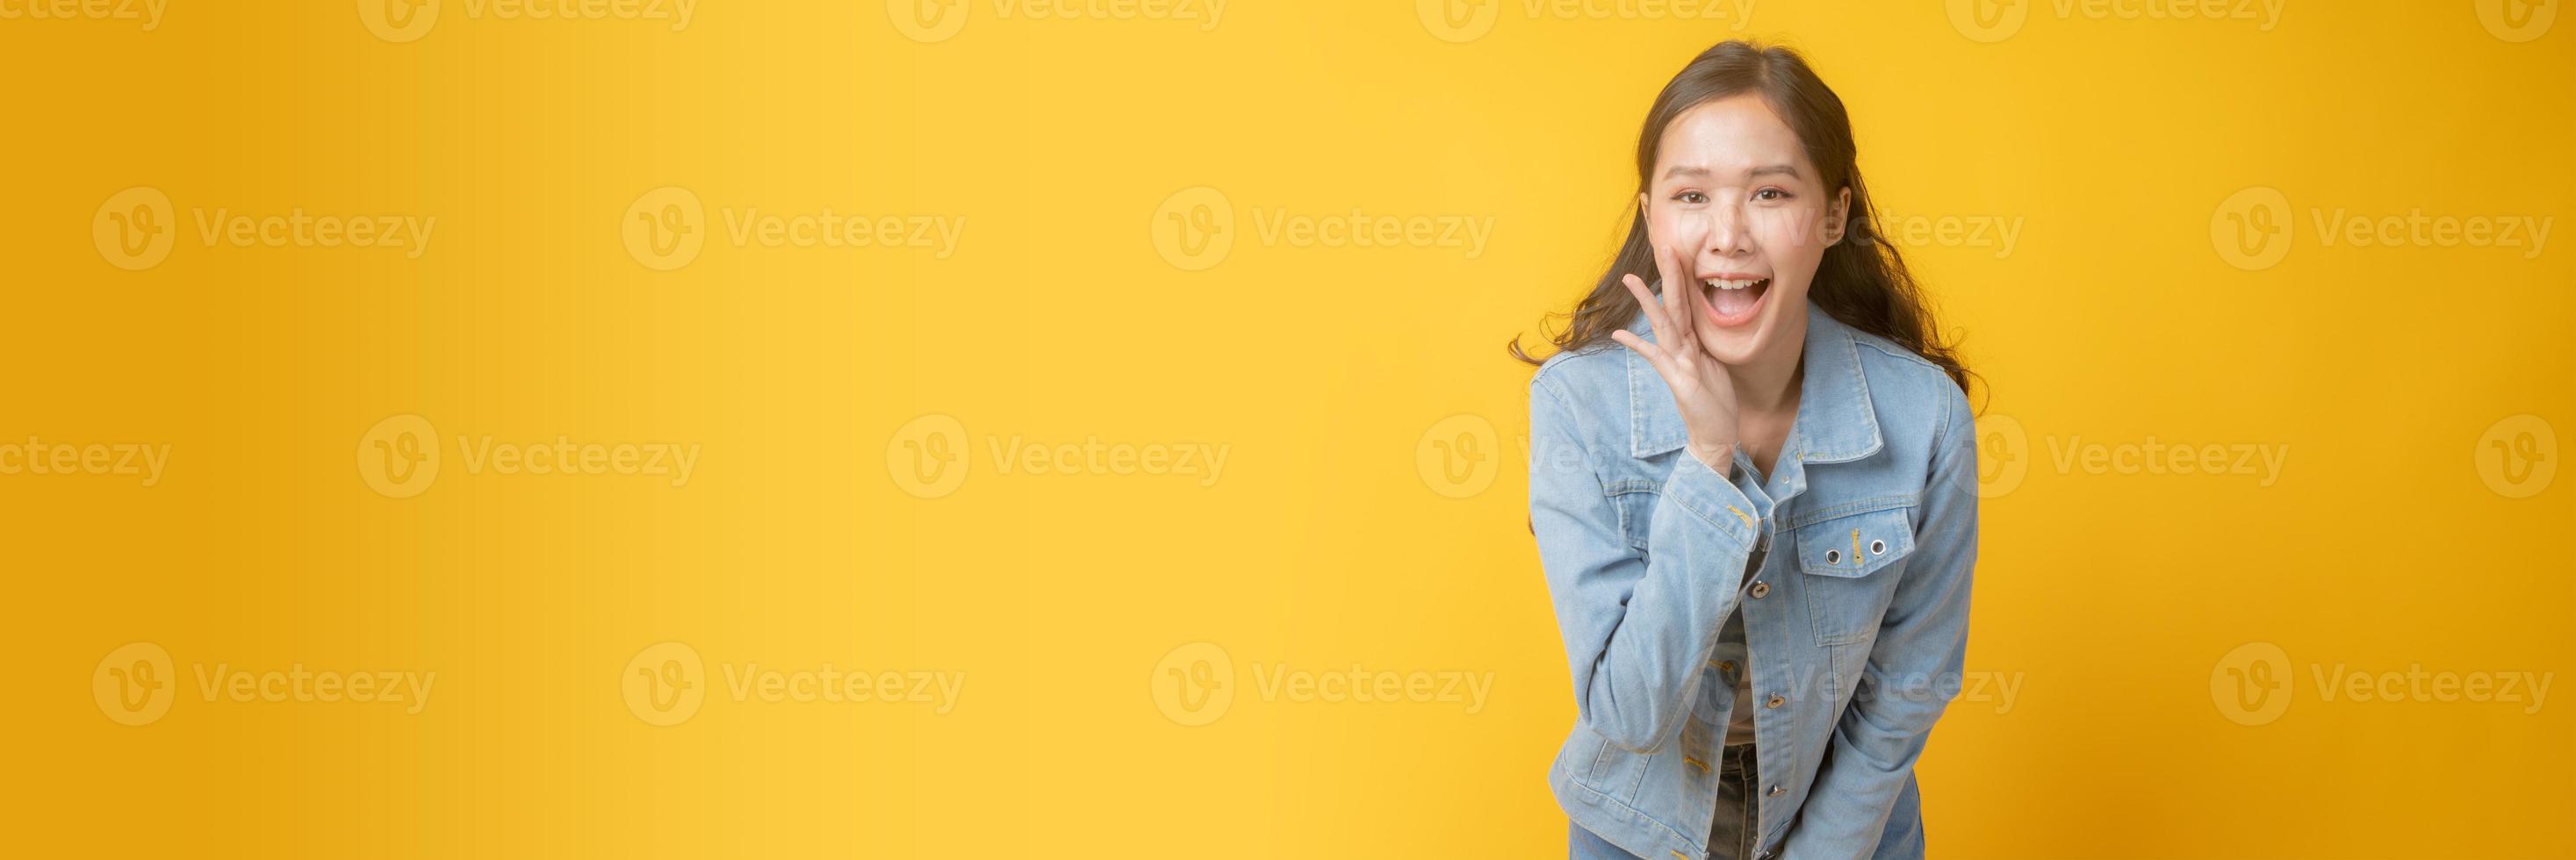 Asian woman smiling and gesturing with hand next to mouth on yellow background photo